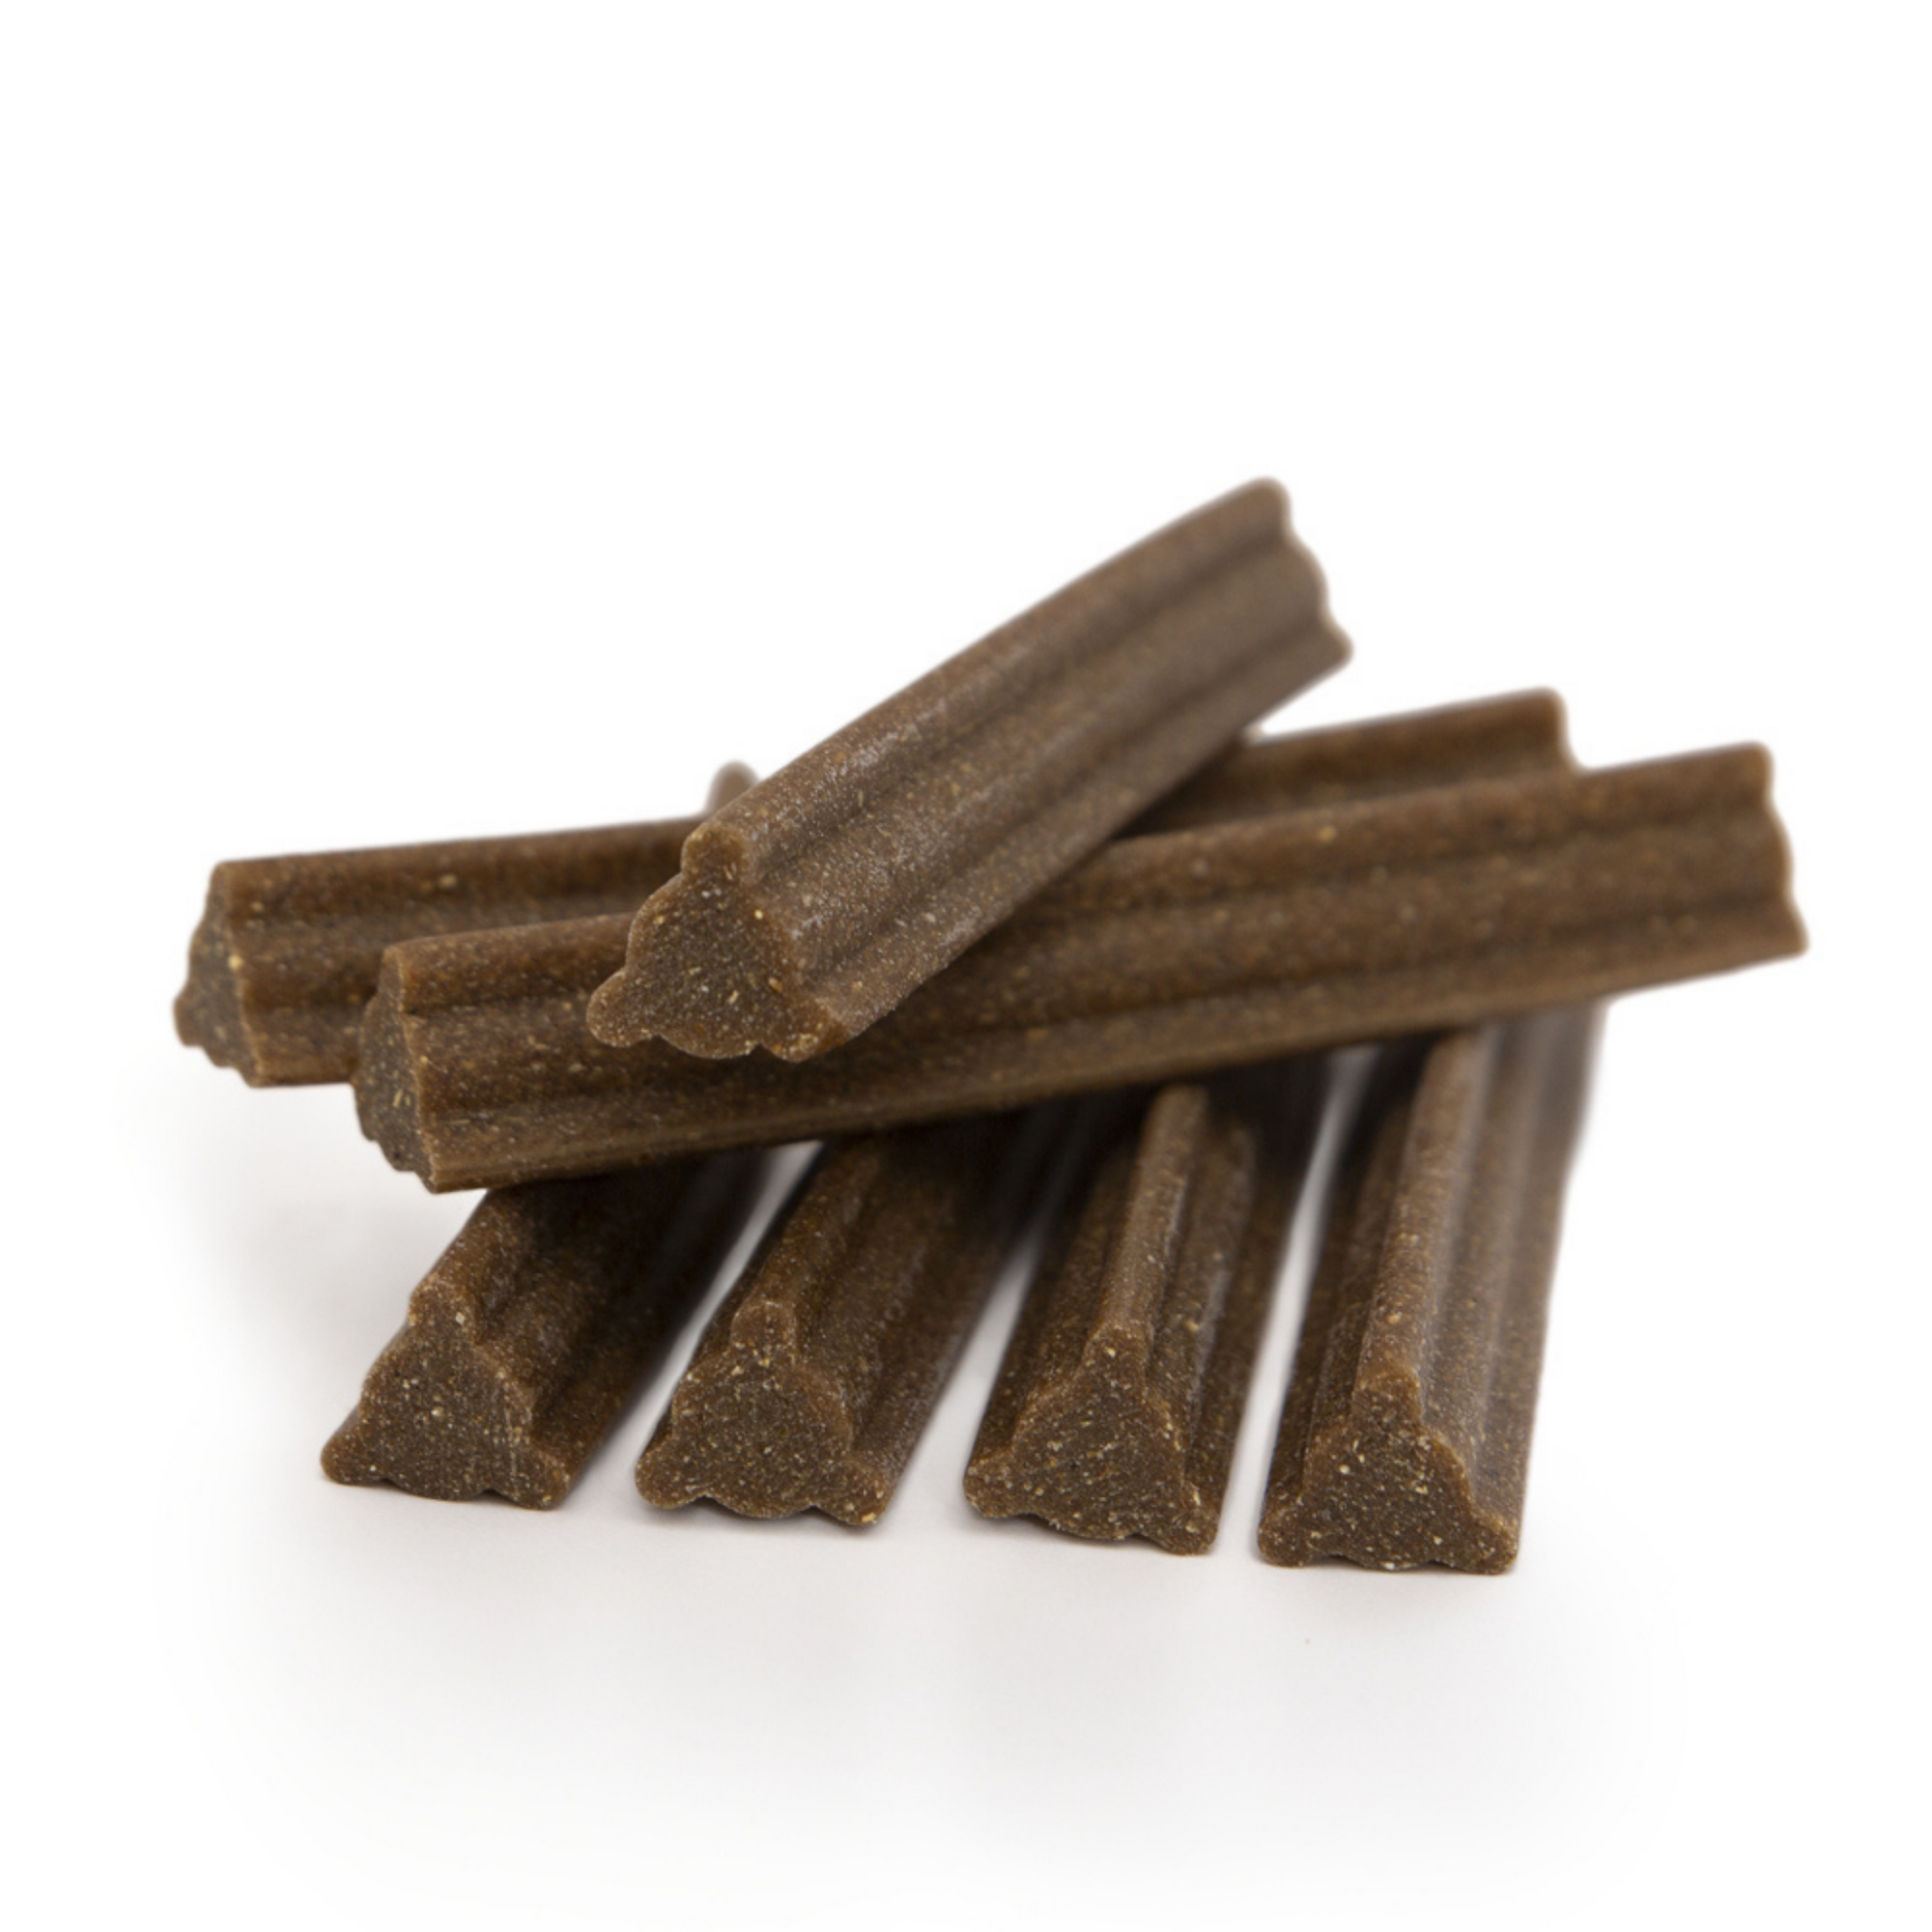 ESSENTIAL Natural treats for dental hygiene and chewing